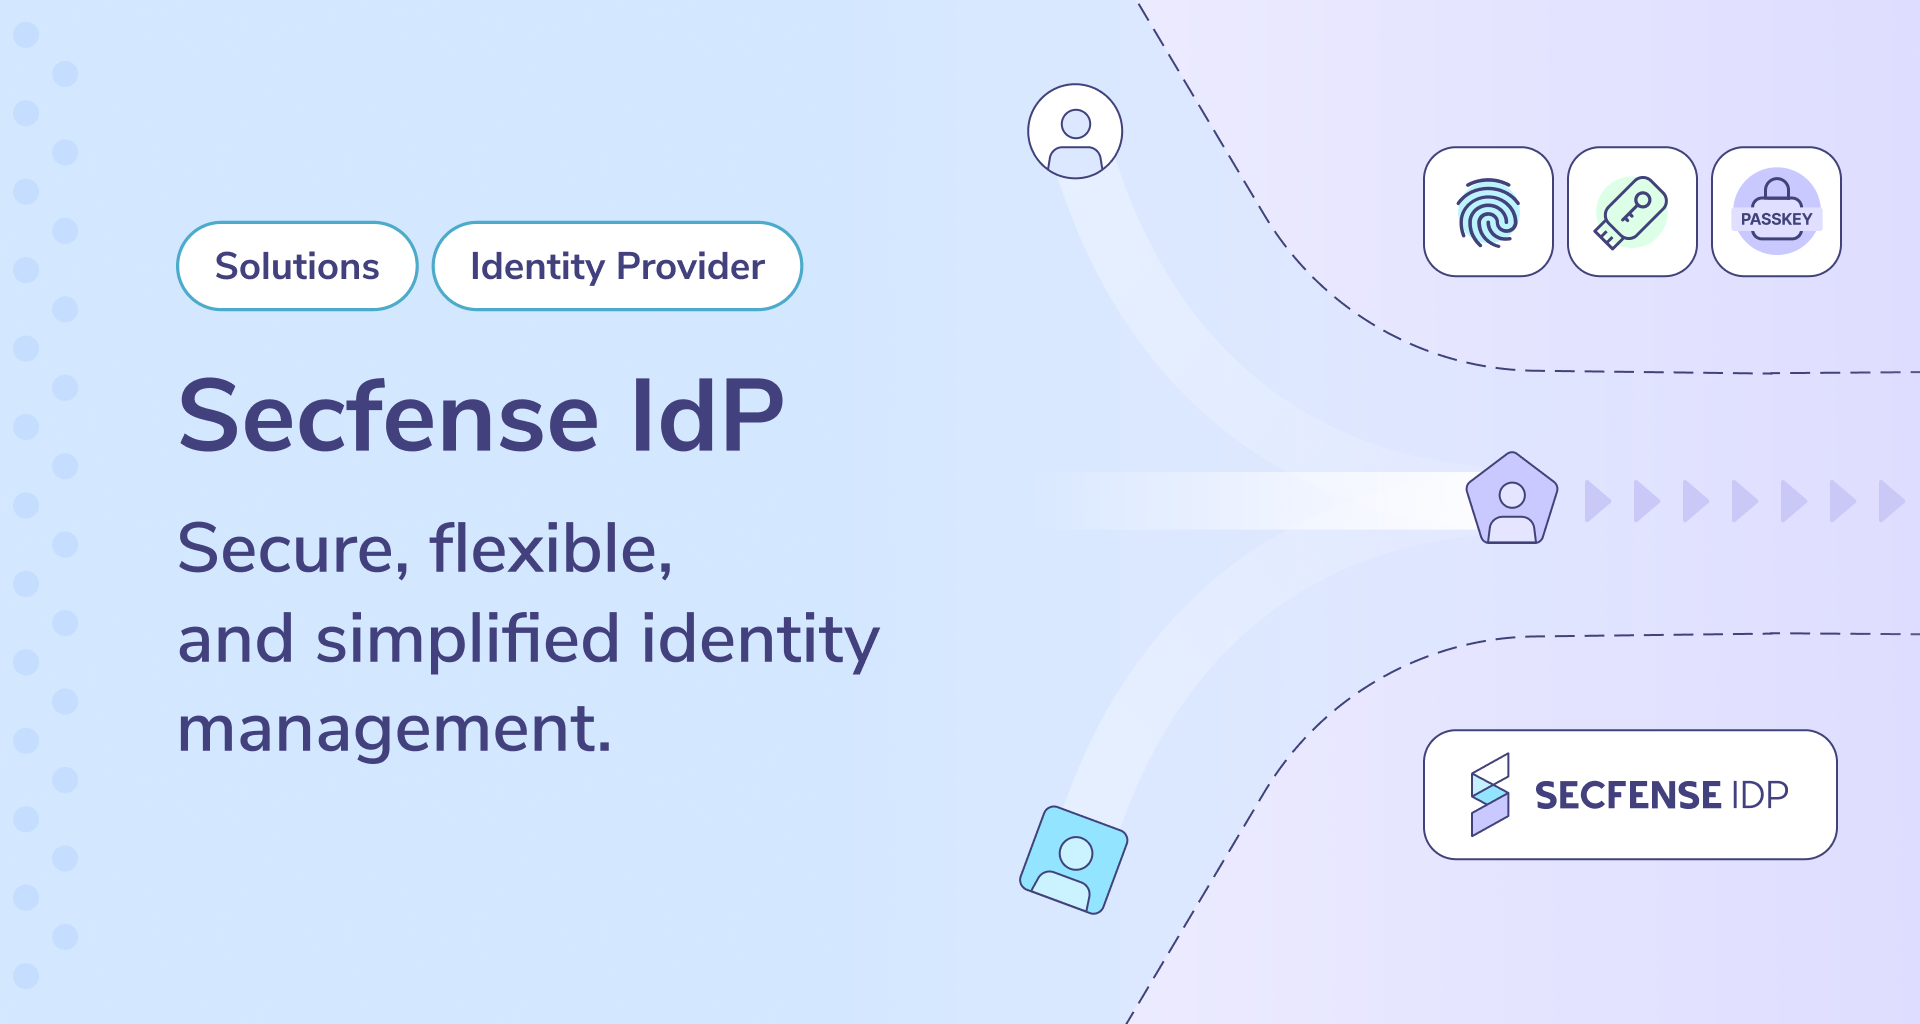 What is Secfense IdP